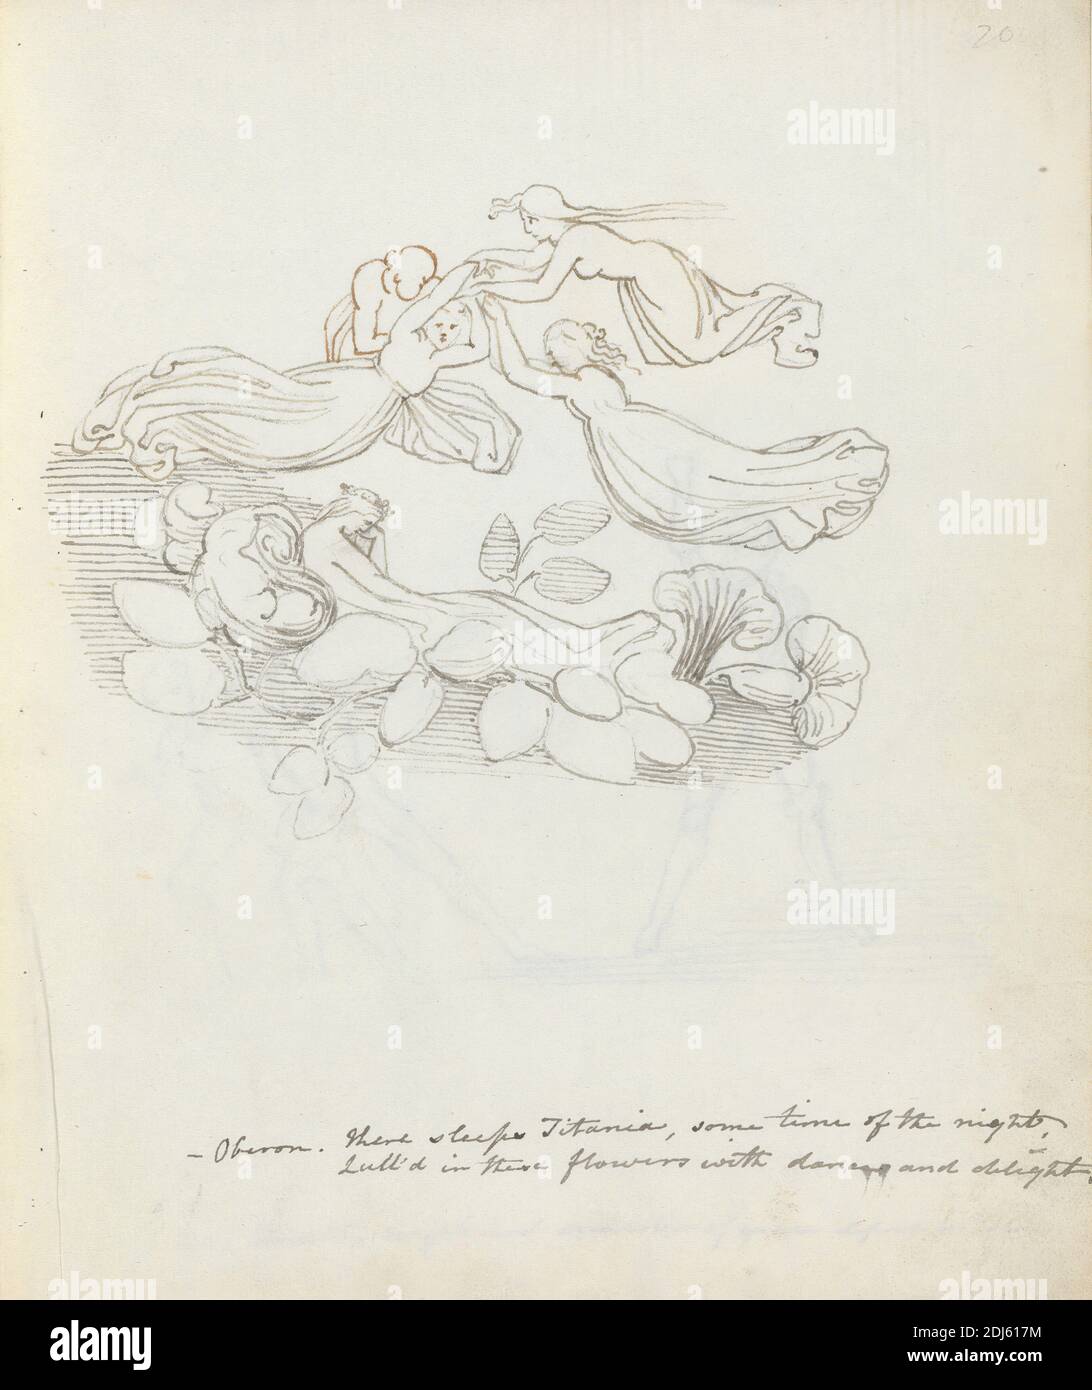 -Oberon. There sleeps Titania, some time of the night..., John Flaxman, 1755–1826, British, 1783, Pen, ink and wash, Sheet: 10 1/2 x 7 3/8in. (26.7 x 18.7cm Stock Photo